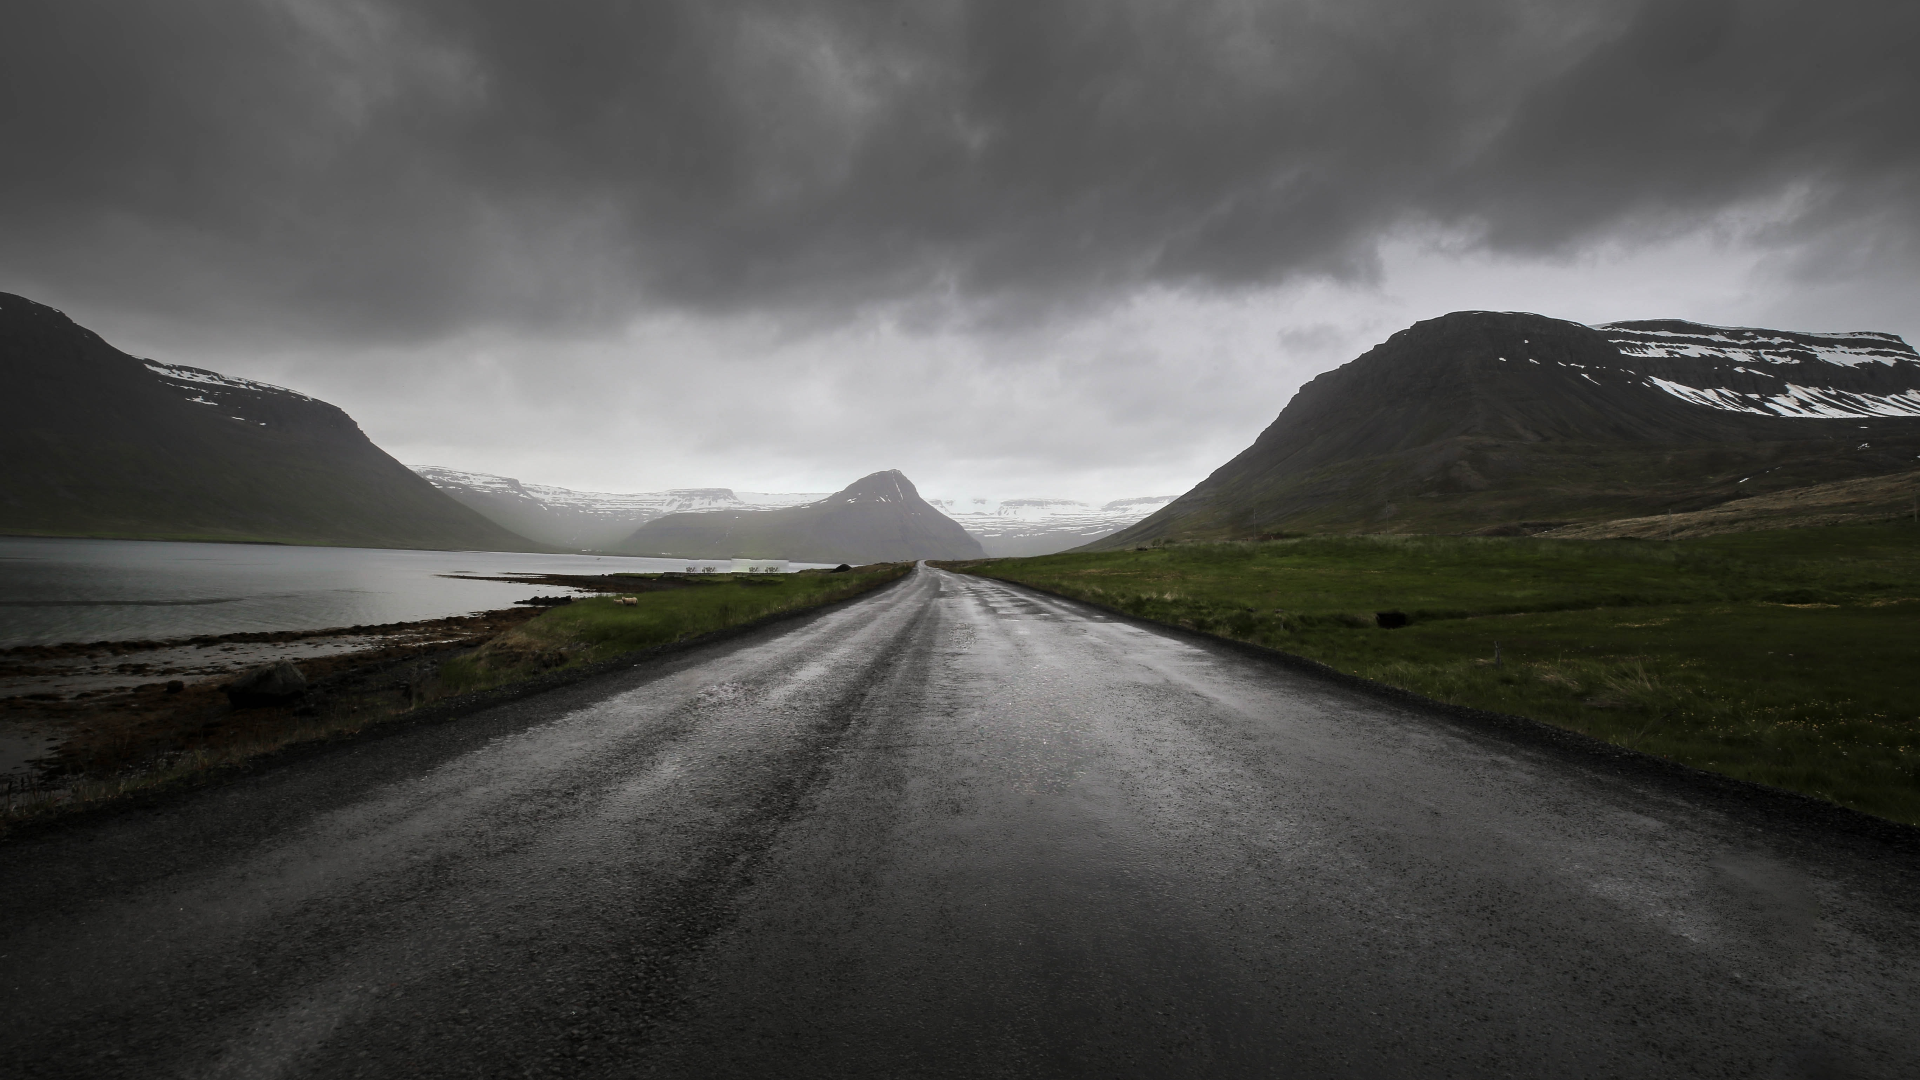 General 1920x1080 nature landscape mountains river road grass clouds snow Monsoon fjord Iceland dirt road overcast gloomy